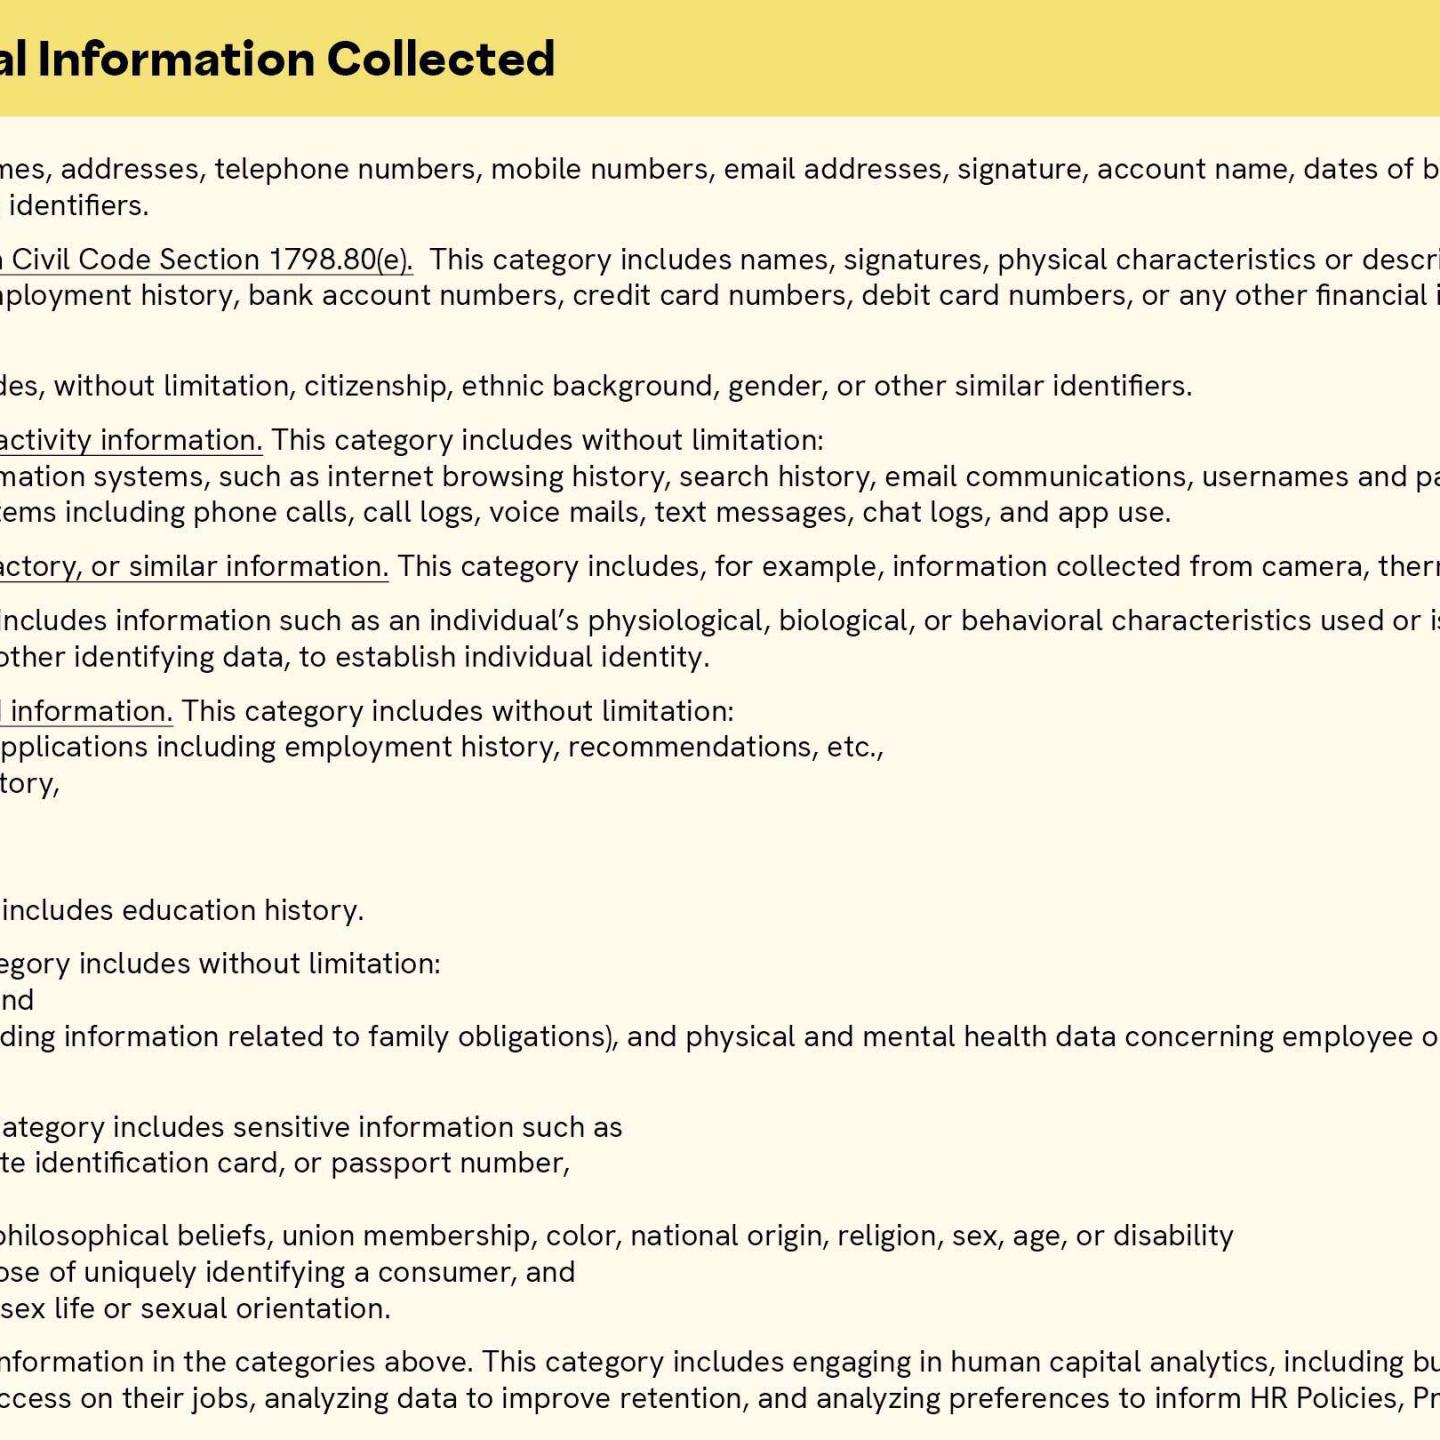 The Categories of Personal Information Collected include the following: 1. Identifiers. This category includes names, addresses, telephone numbers, mobile numbers, email addresses, signature, account name, dates of birth, bank account information, and other similar contact information and identifiers. 2. Personal information under California Civil Code Section 1798.80(e).  This category includes names, signatures, physical characteristics or descriptions, addresses, telephone numbers, education, employment, employment history, bank account numbers, credit card numbers, debit card numbers, or any other financial information, medical information, or health insurance information. 3. Protected status.  This category includes, without limitation, citizenship, ethnic background, gender, or other similar identifiers. 4. Internet or other electronic network activity information. This category includes without limitation: all activity on the Company’s information systems, such as internet browsing history, search history, email communications, usernames and passwords, and all activity on communications systems including phone calls, call logs, voice mails, text messages, chat logs, and app use. 5. Audio, electronic, visual, thermal, olfactory, or similar information. This category includes, for example, information collected from camera, thermometers, and similar devices. 6. Biometric information. This category includes information such as an individual’s physiological, biological, or behavioral characteristics used or is intended to be used singly or in combination with each other or with other identifying data, to establish individual identity. 7. Professional and employment-related information. This category includes without limitation: data submitted with employment applications including employment history, recommendations, etc., background check and criminal history, work authorization, and fitness for duty data and reports. 8. Education information. This category includes education history. 9. Limited medical information. This category includes without limitation: fitness for duty data and reports, and leave of absence information (including information related to family obligations), and physical and mental health data concerning employee or job applicant and his or her family members. 10. Sensitive personal information. This category includes sensitive information such as social security, driver’s license, state identification card, or passport number, precise geolocation, racial or ethnic origin, religious or philosophical beliefs, union membership, color, national origin, religion, sex, age, or disability, biometric information for the purpose of uniquely identifying a consumer, and information concerning health and sex life or sexual orientation. 11. Inferences drawn from the personal information in the categories above. This category includes engaging in human capital analytics, including but not limited to, identifying certain correlations about individuals and success on their jobs, analyzing data to improve retention, and analyzing preferences to inform HR Policies, Programs and Procedures.